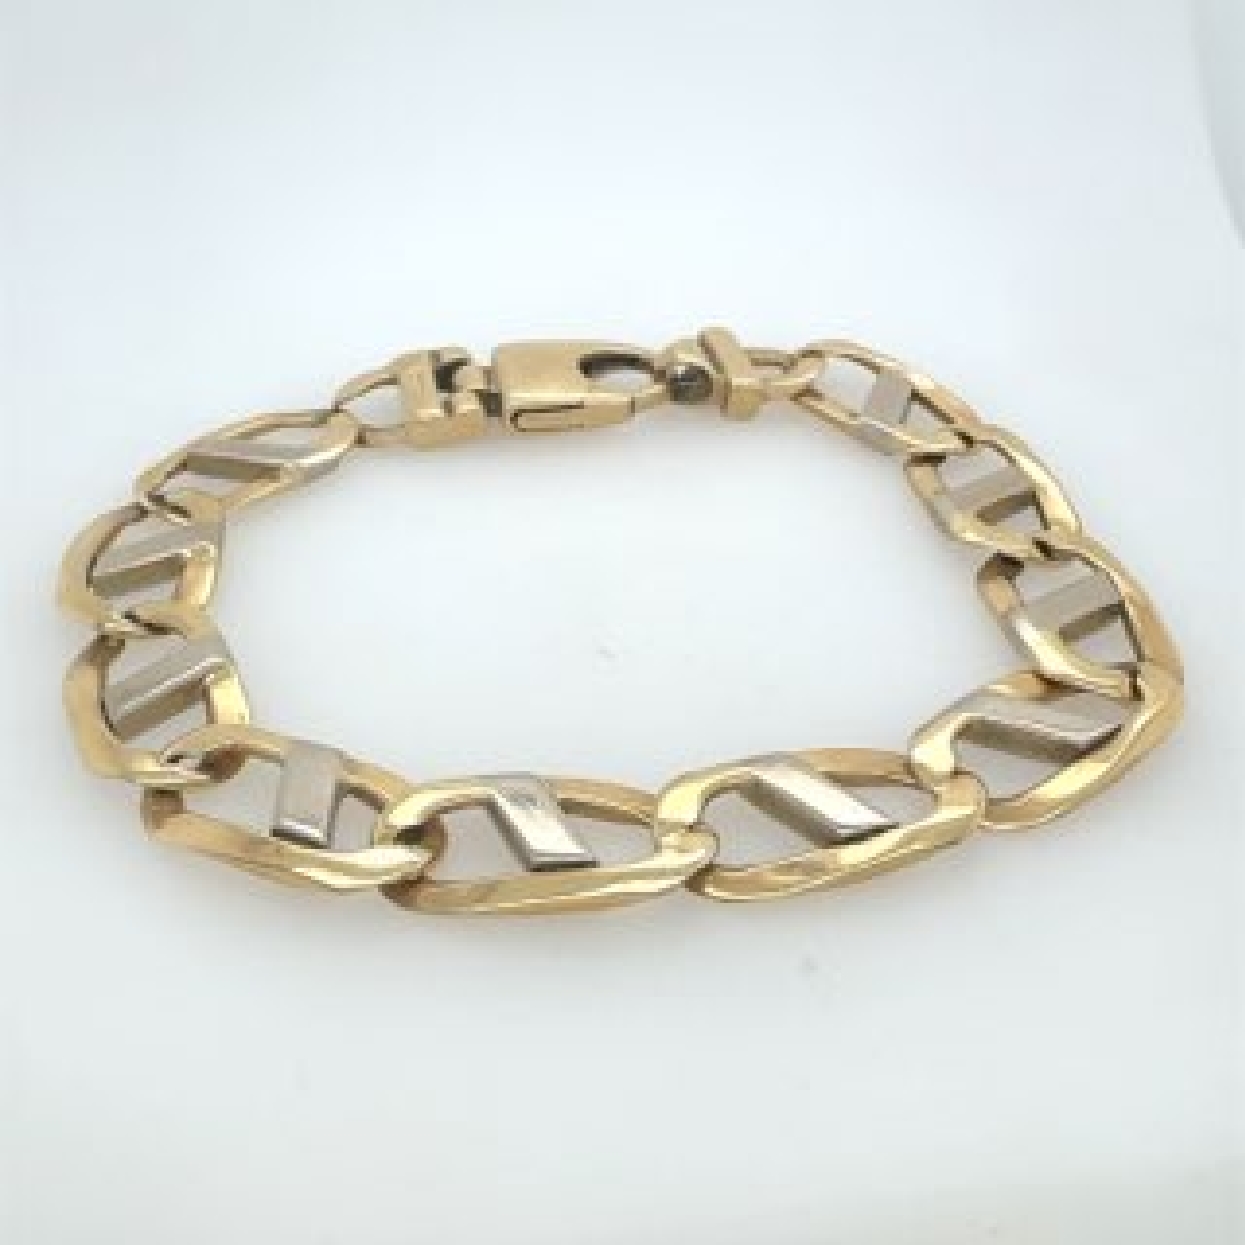 14K White Gold and Yellow Gold Mariners Link Bracelet

9 Inches